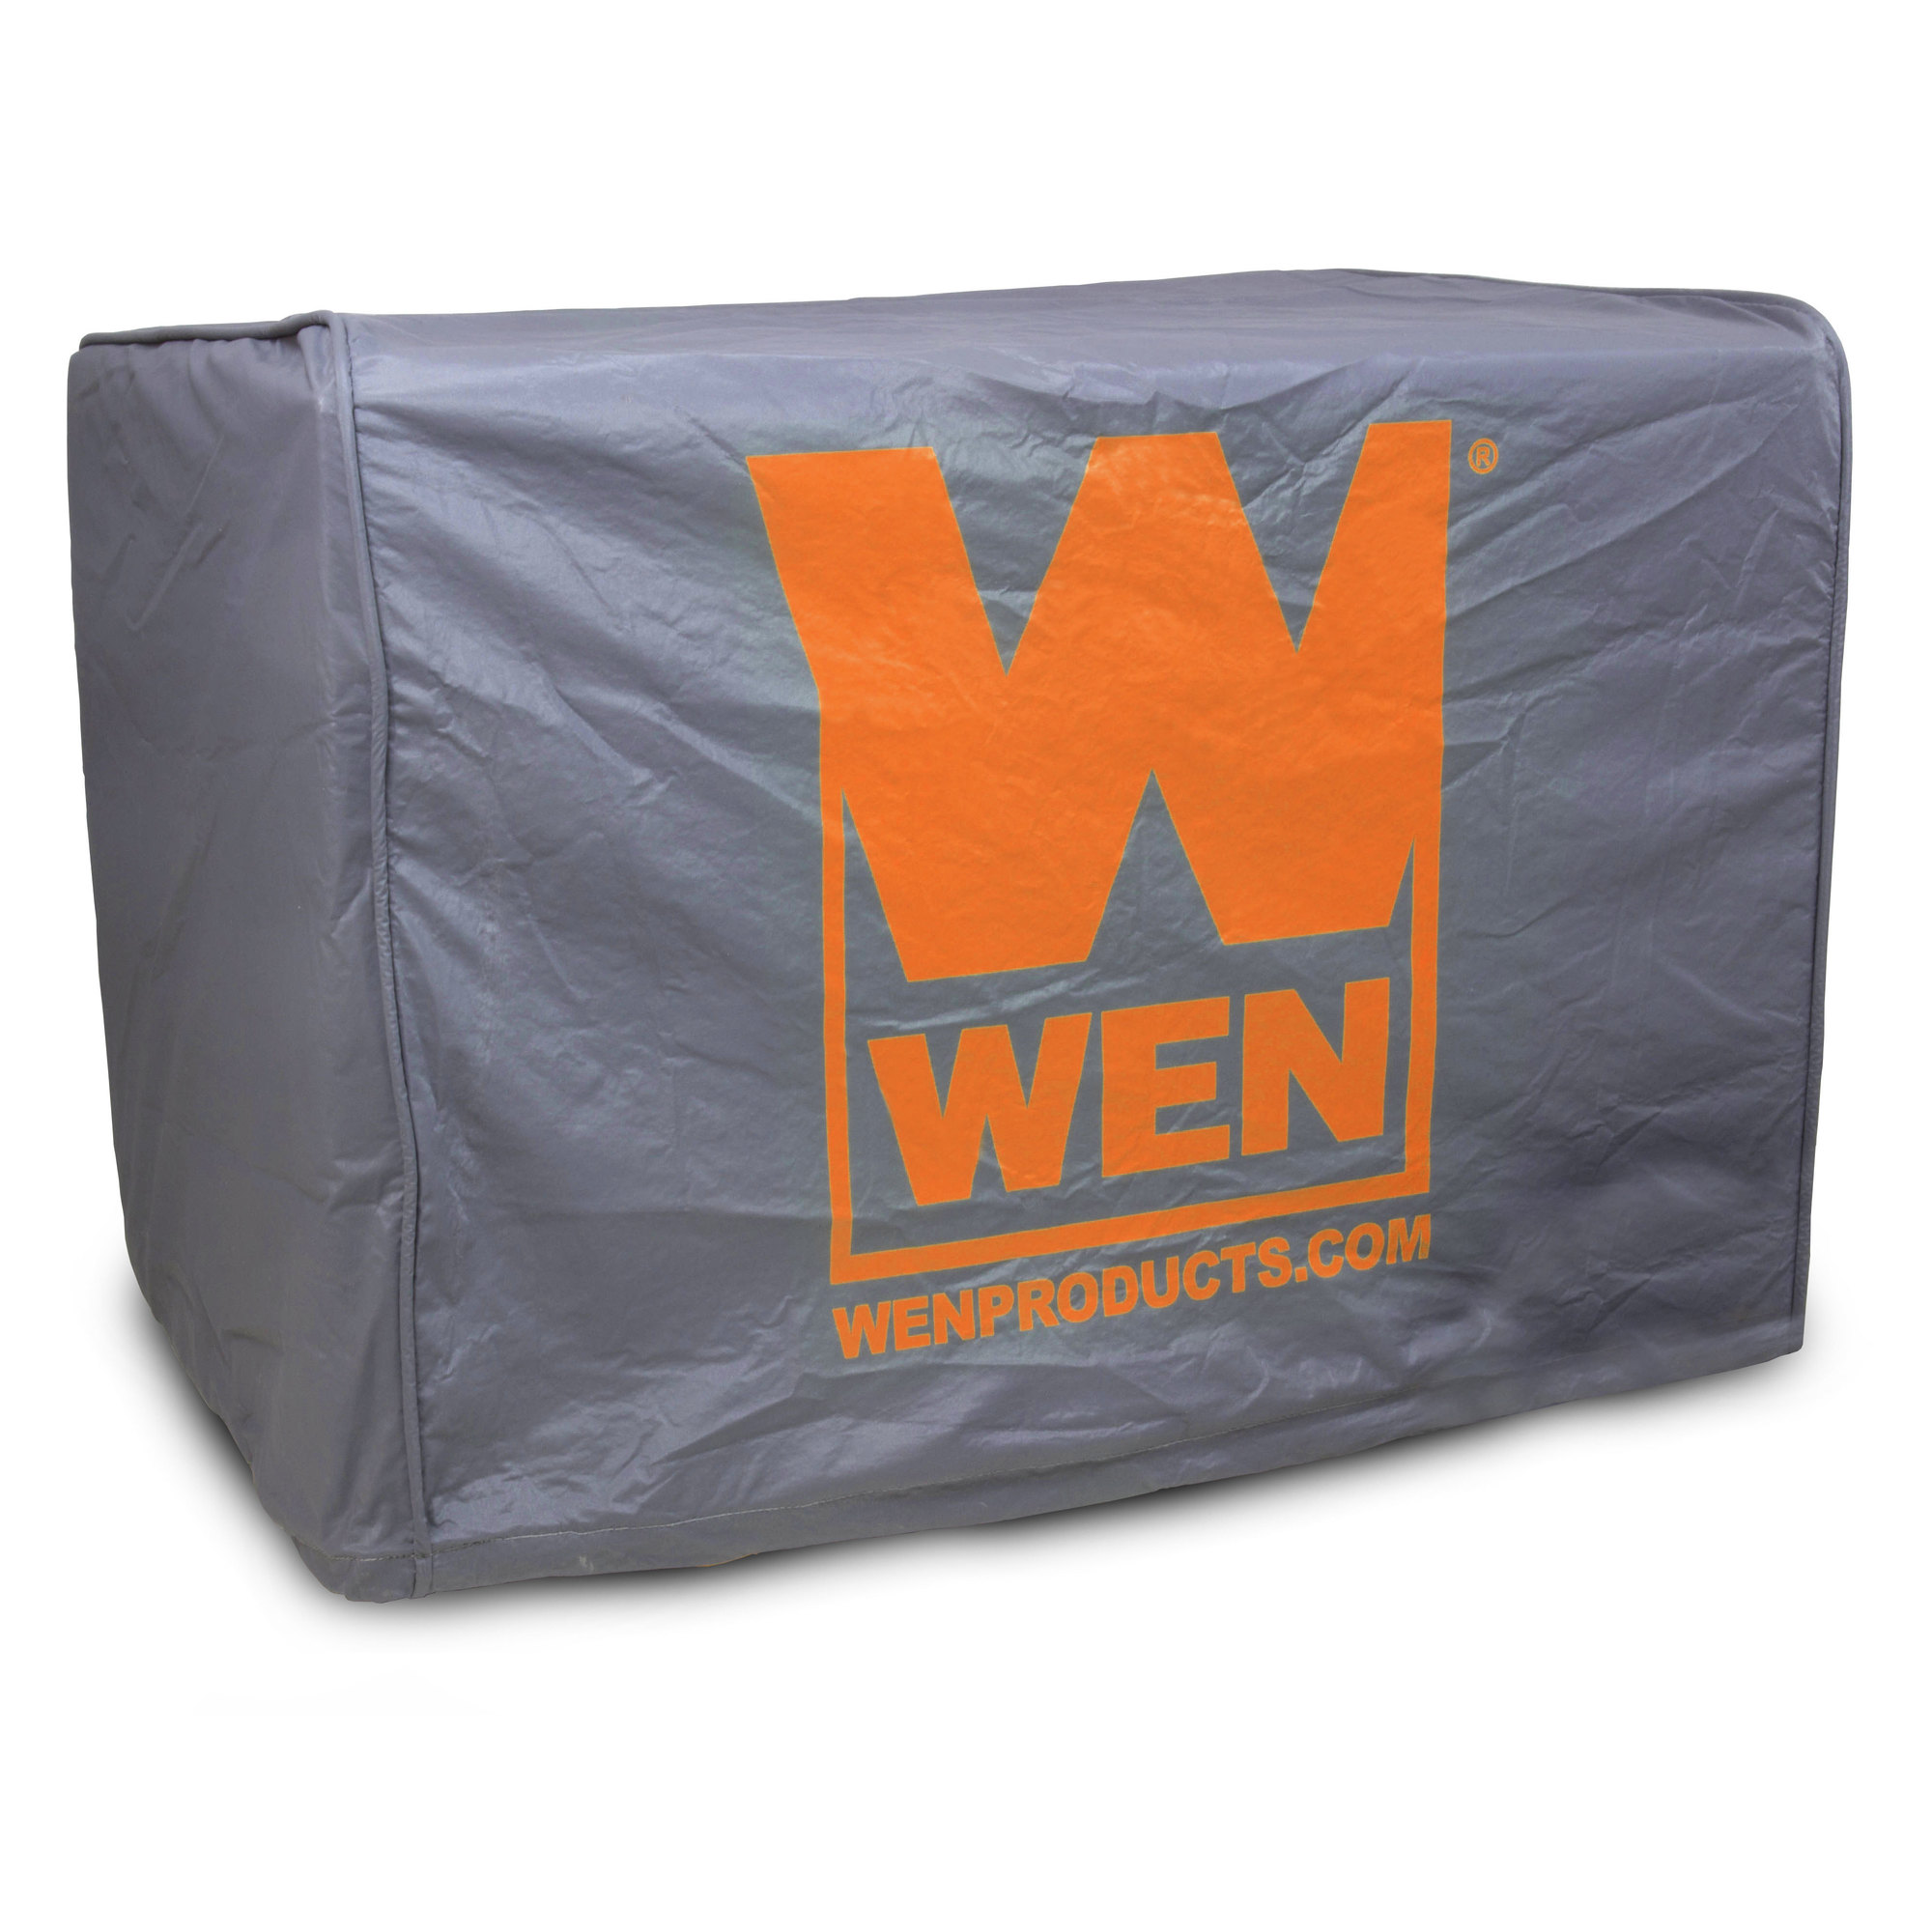 WEN, Weatherproof Generator Cover, Material Vinyl, Closure Type Other, Compatible With Other, Model 56310iC